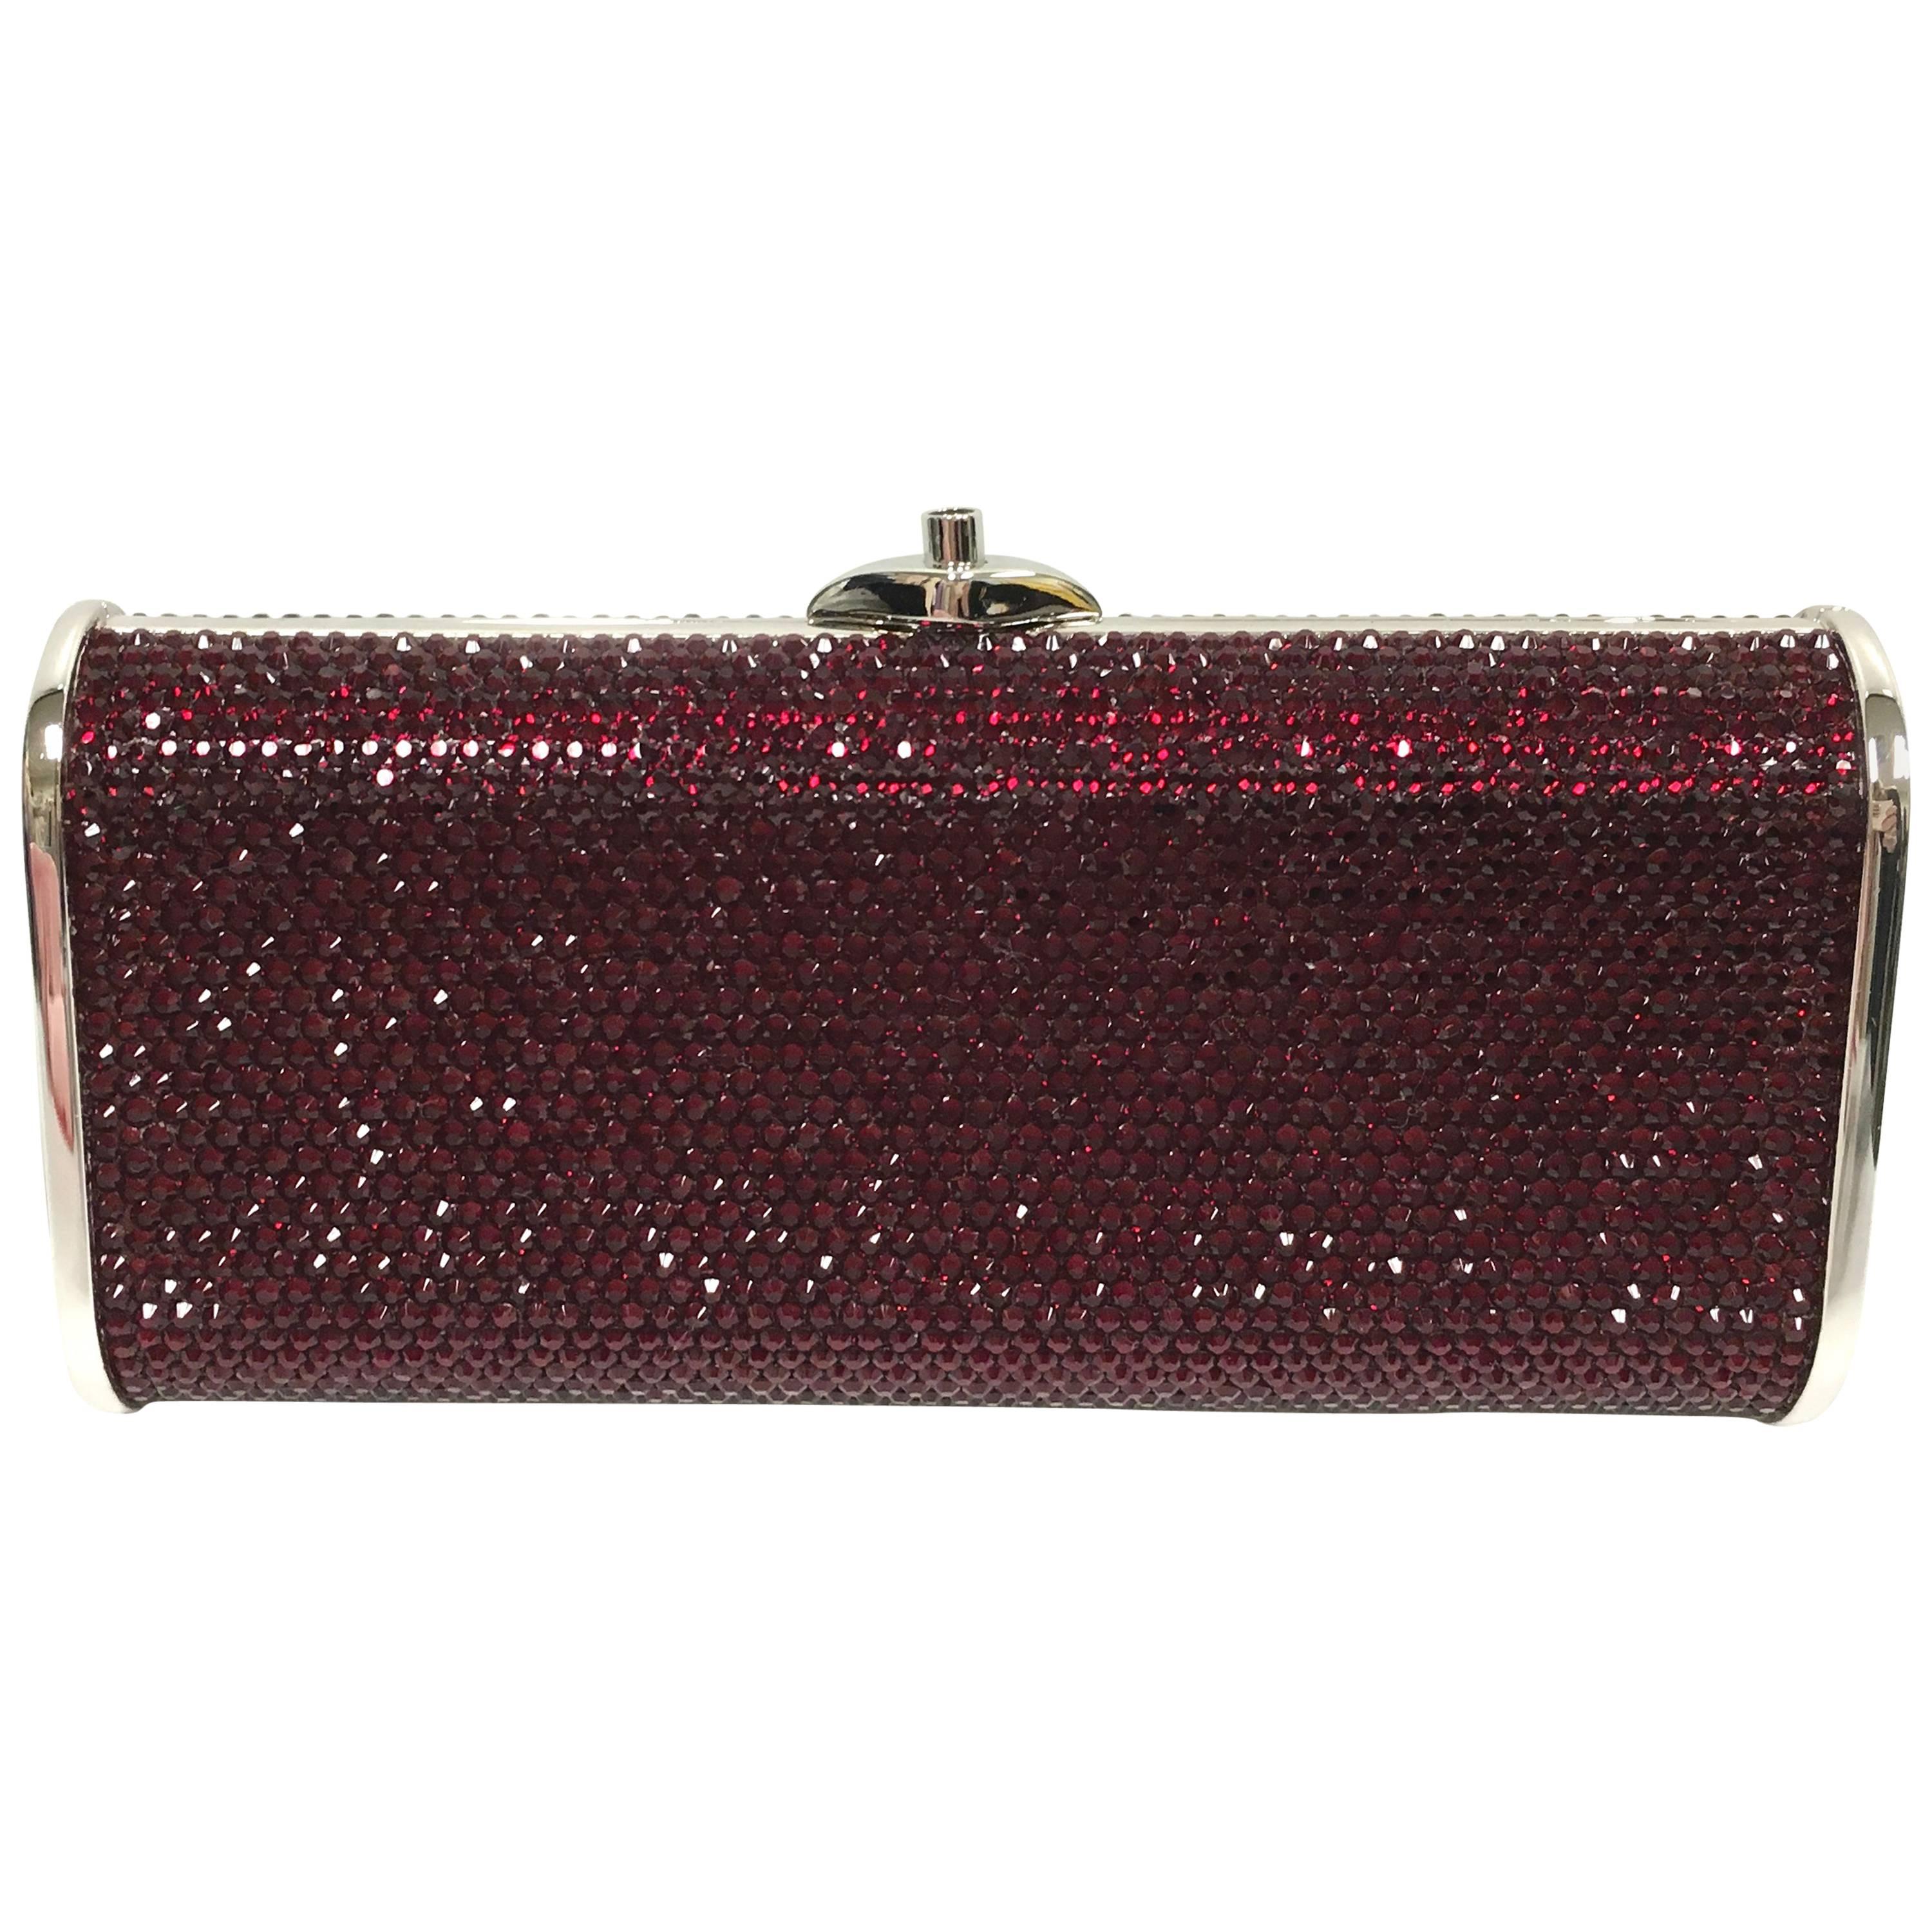 JUDITH LEIBER Silver Framed Red Crystal Minaudiere Clutch Bag